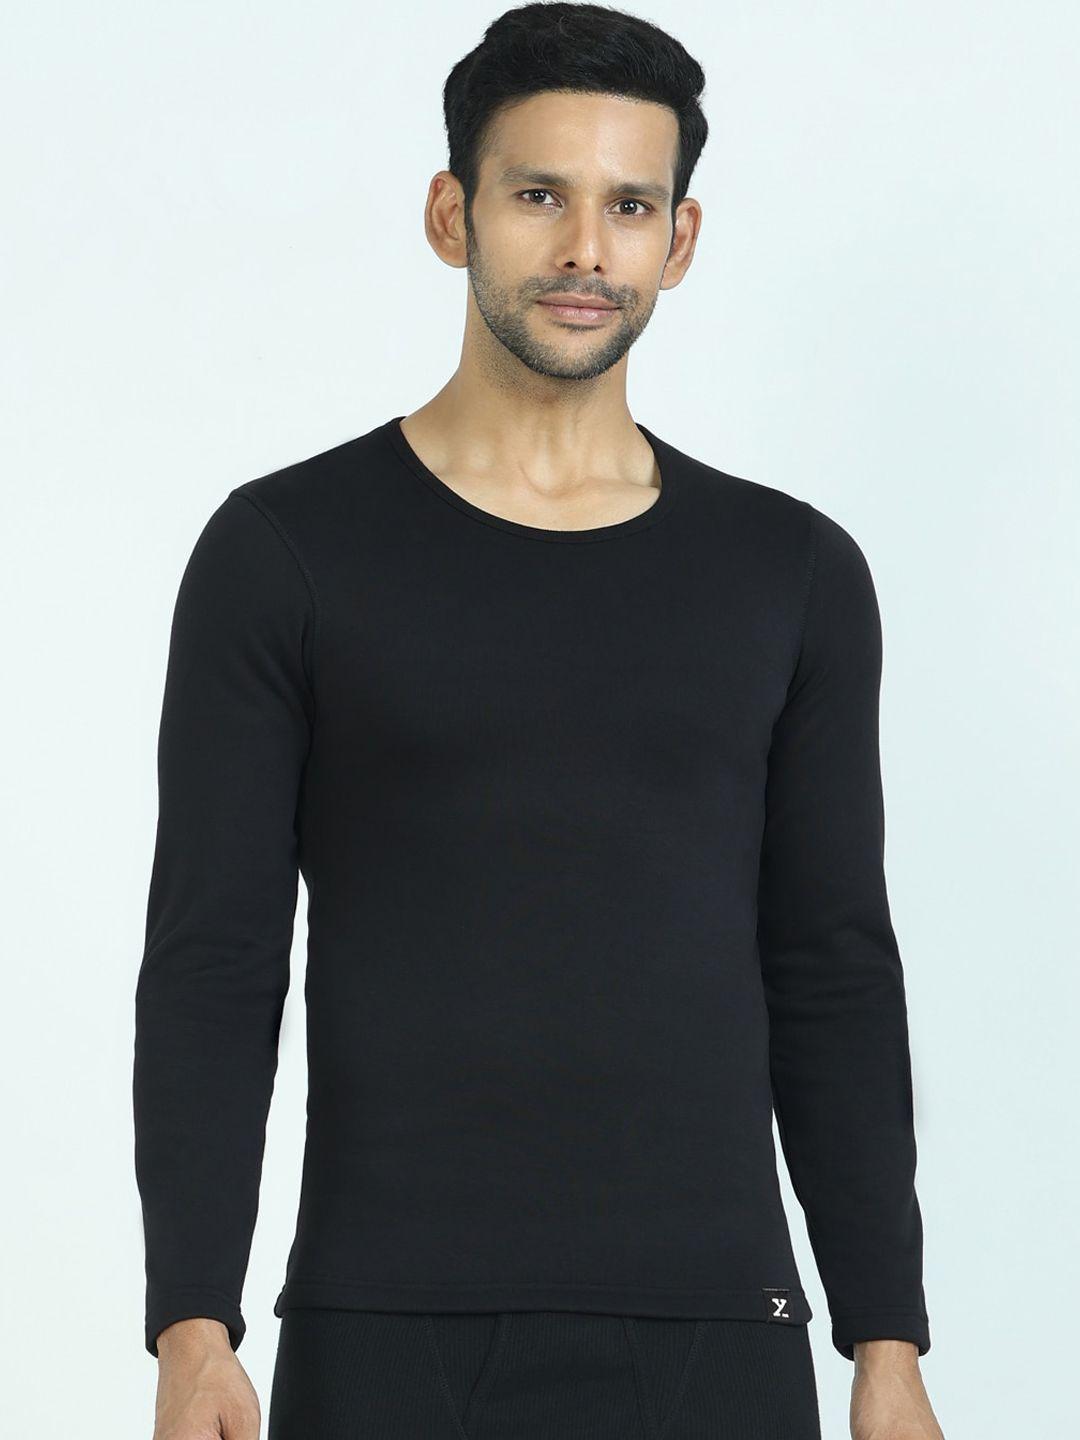 xyxx skinny fit solid fleece thermal